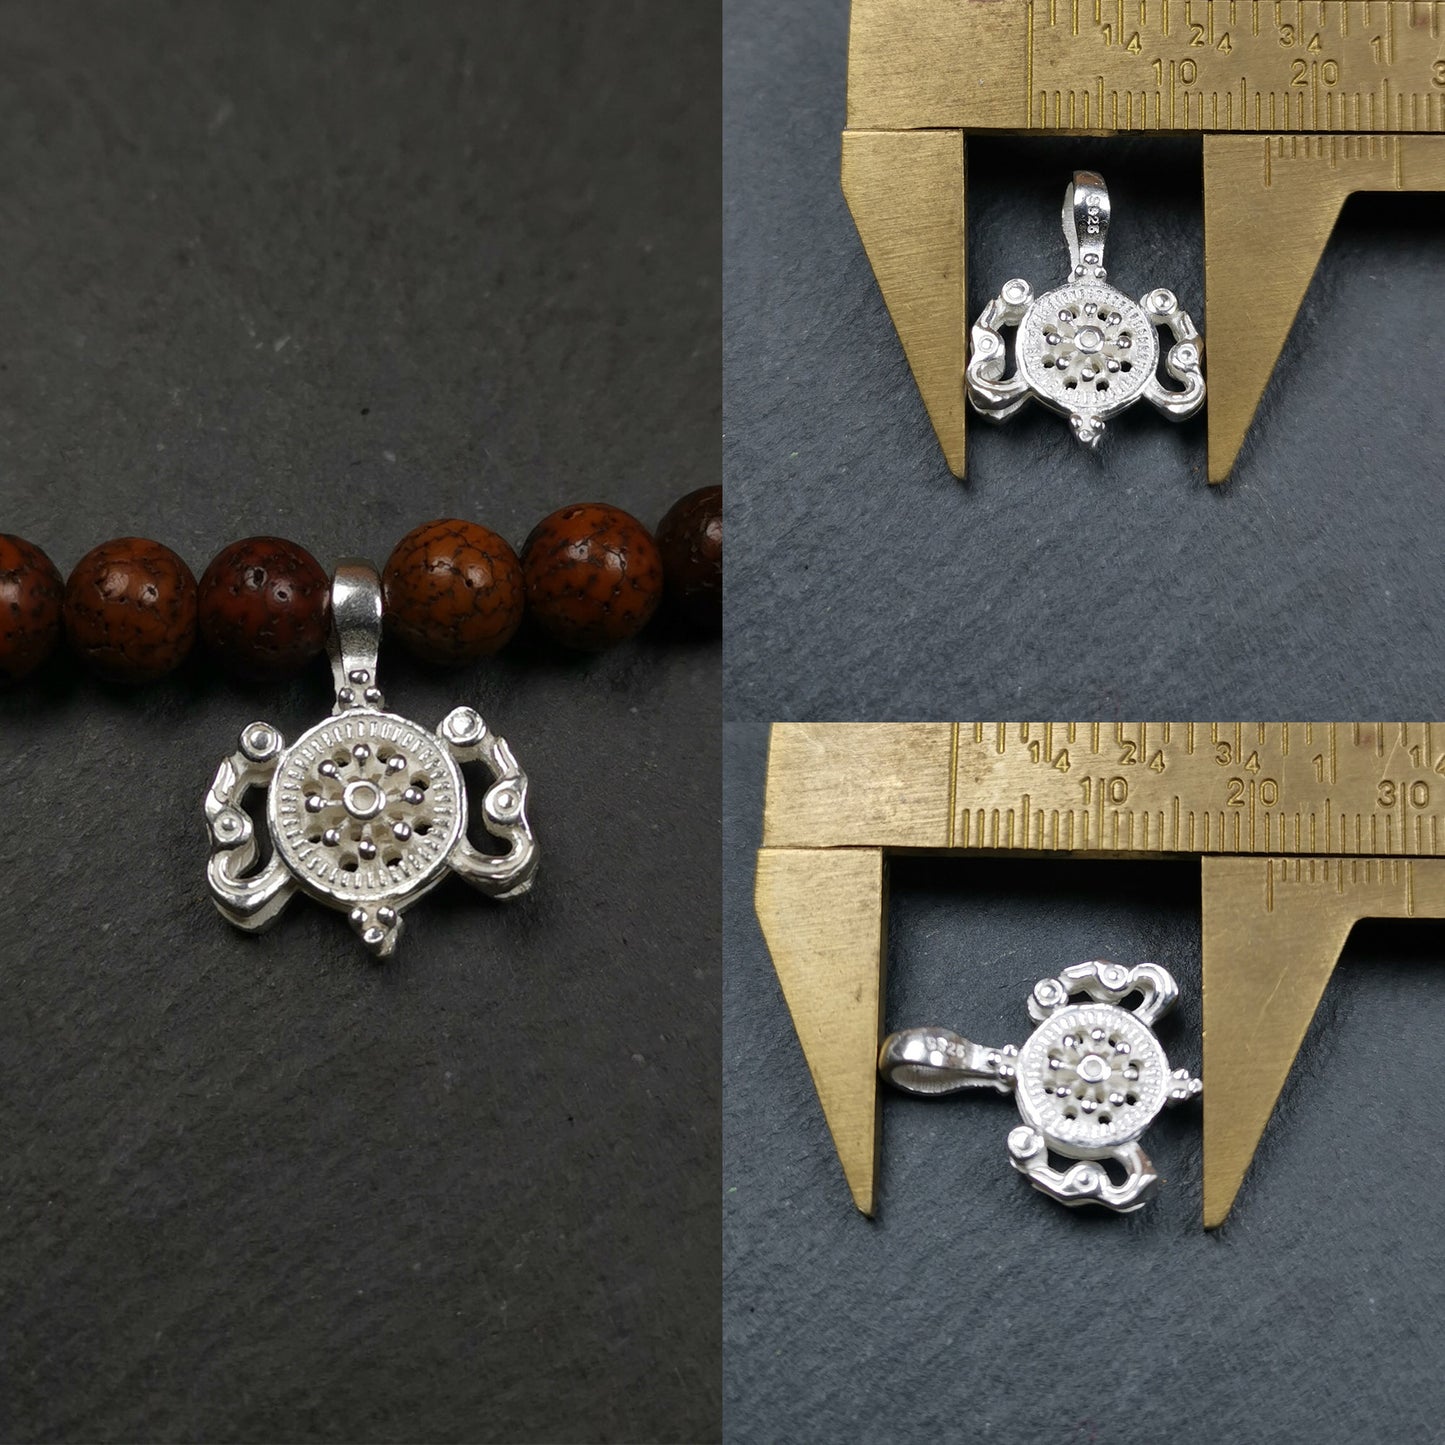 These bum counter clips are handmade by Tibetan craftsmen and come from Hepo Town, Baiyu County, the birthplace of the famous Tibetan handicrafts. Tibetan style counter used on malas/prayer beads to keep count of mantra recitation and accumulation.  Recommended size, suitable for 8-15mm mala. The background reference is 8mm lotus seed mala.